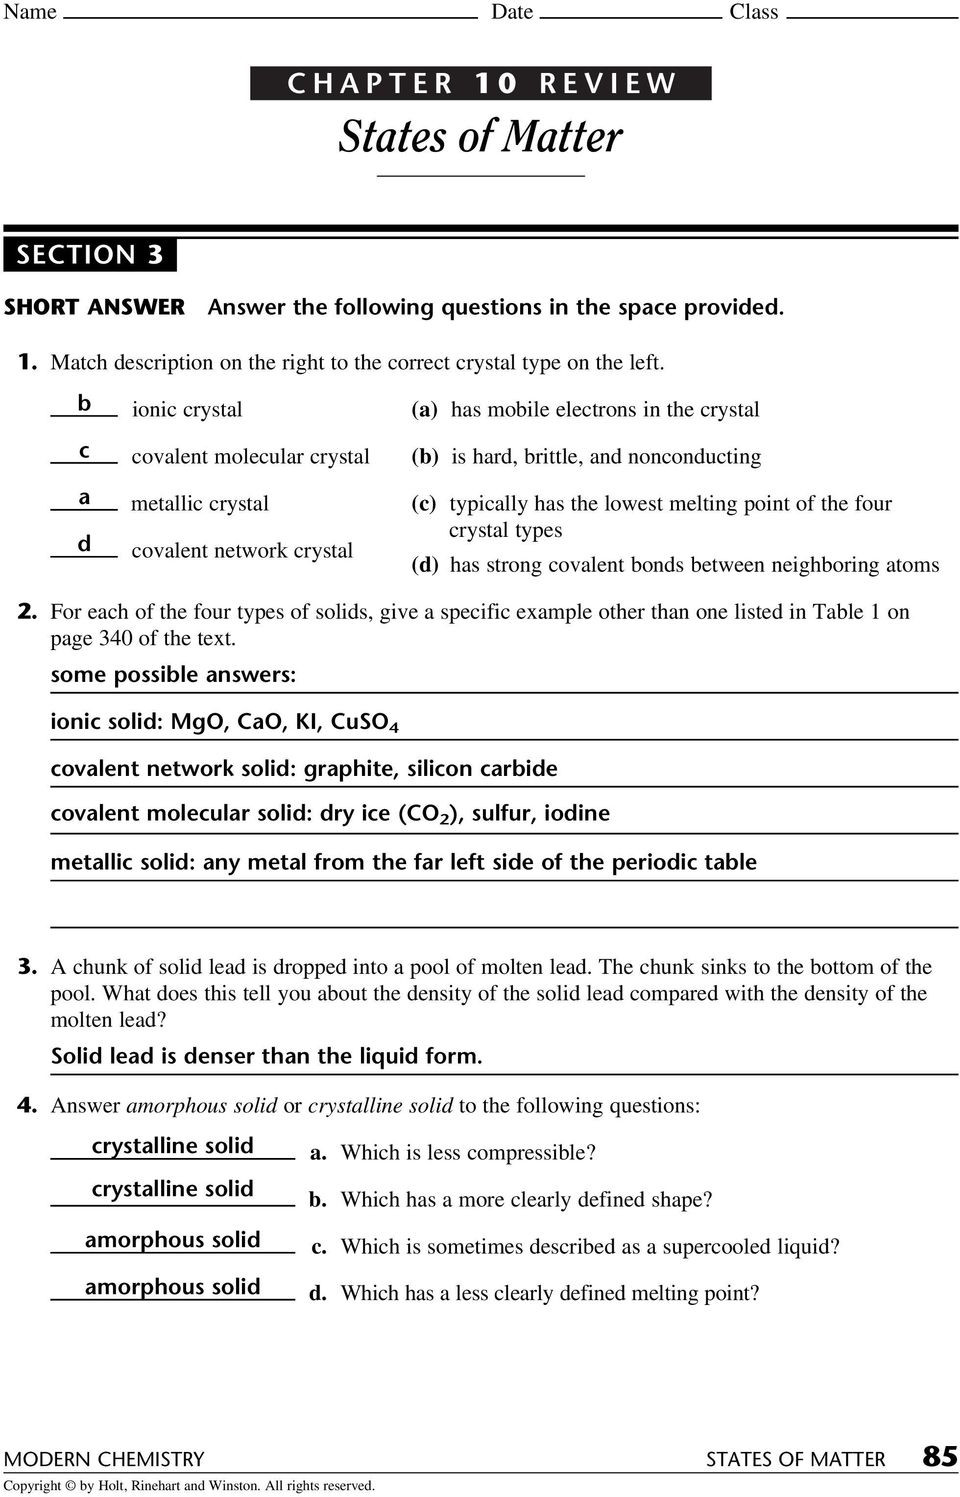 Three States Of Matter Worksheet States Of Matter Chapter 10 Review Section 1 Name Date